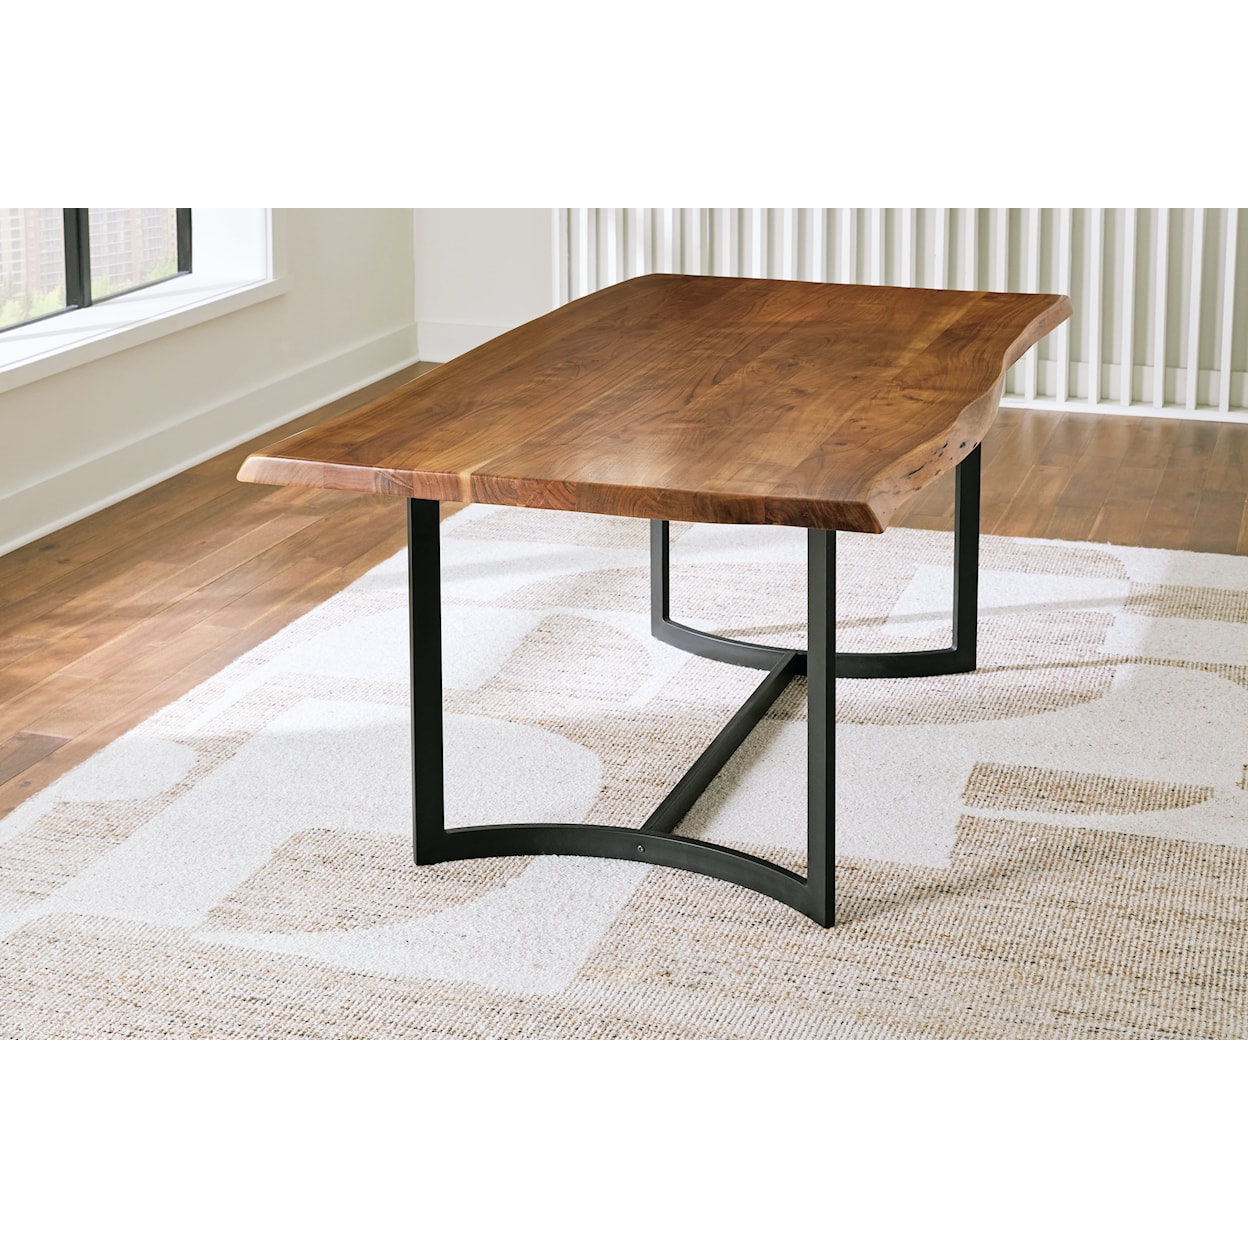 Signature Design by Ashley Fortmaine Rectangular Dining Room Table